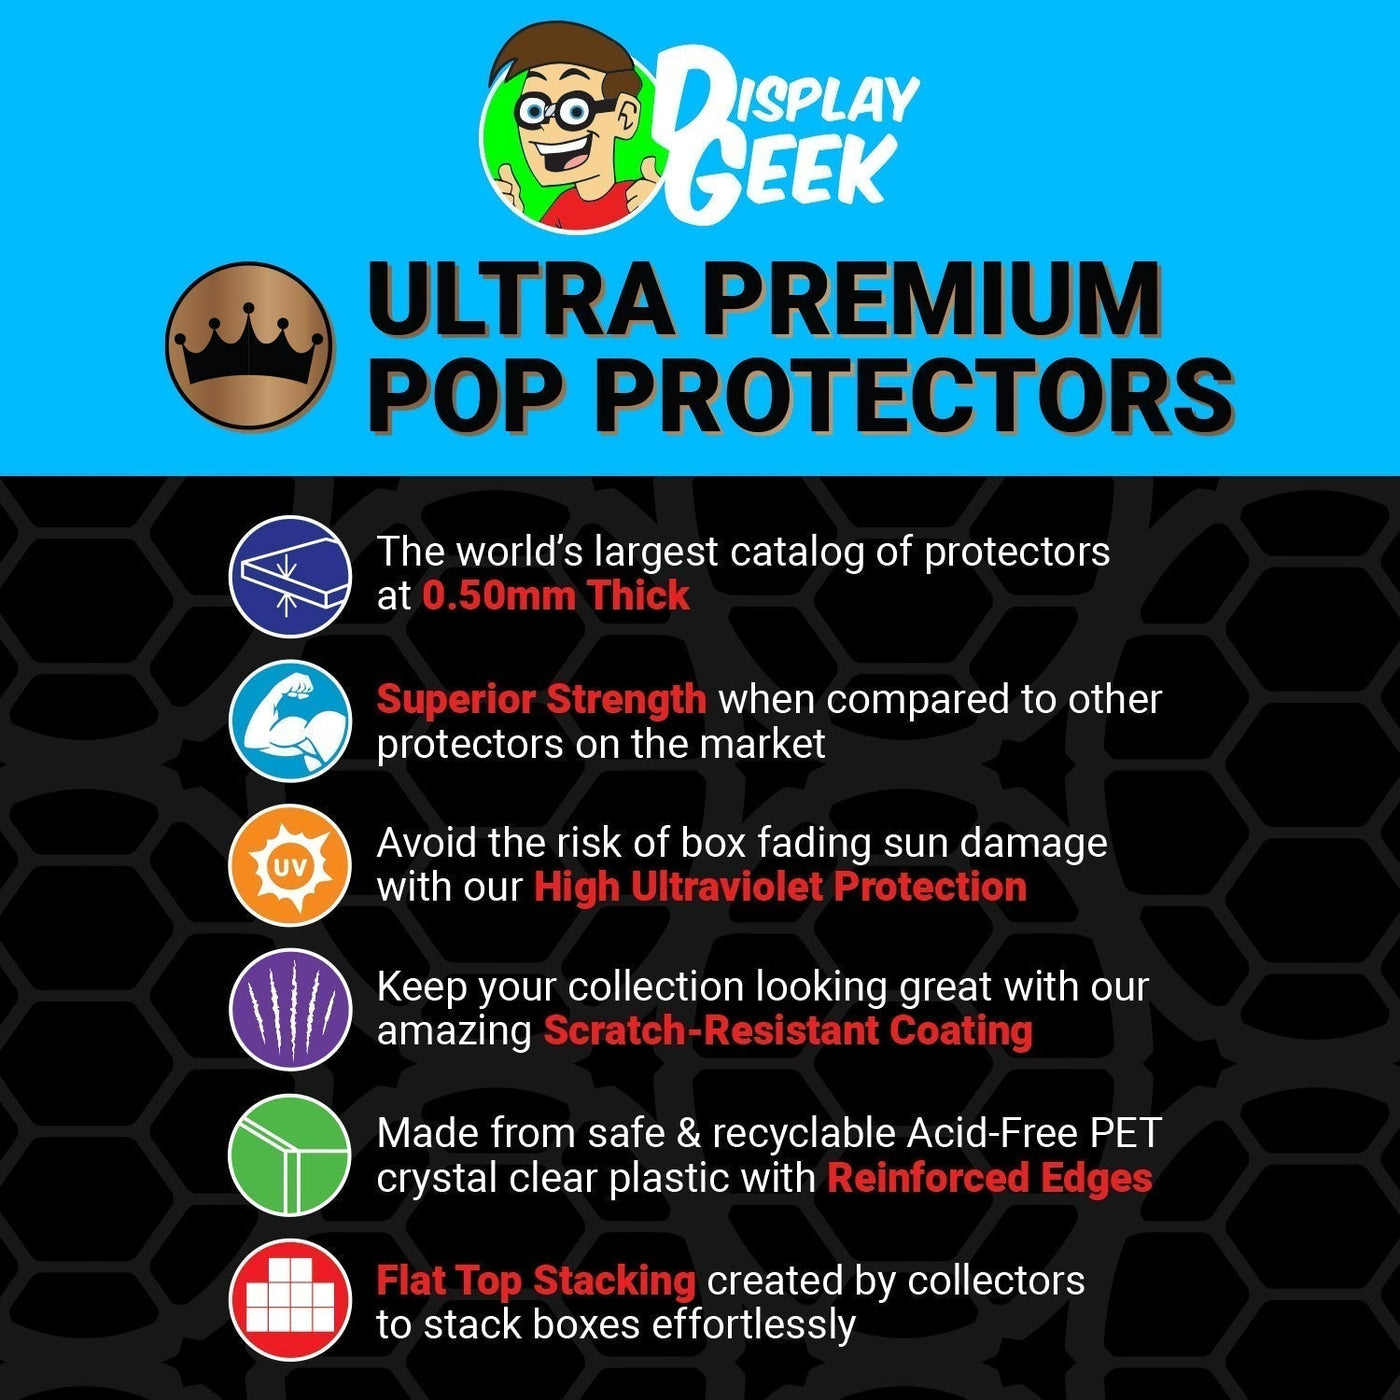 Pop Protector for Hall of Armor Iron Man Model 1 Golden Armor #1035 Funko Pop Deluxe on The Protector Guide App by Display Geek